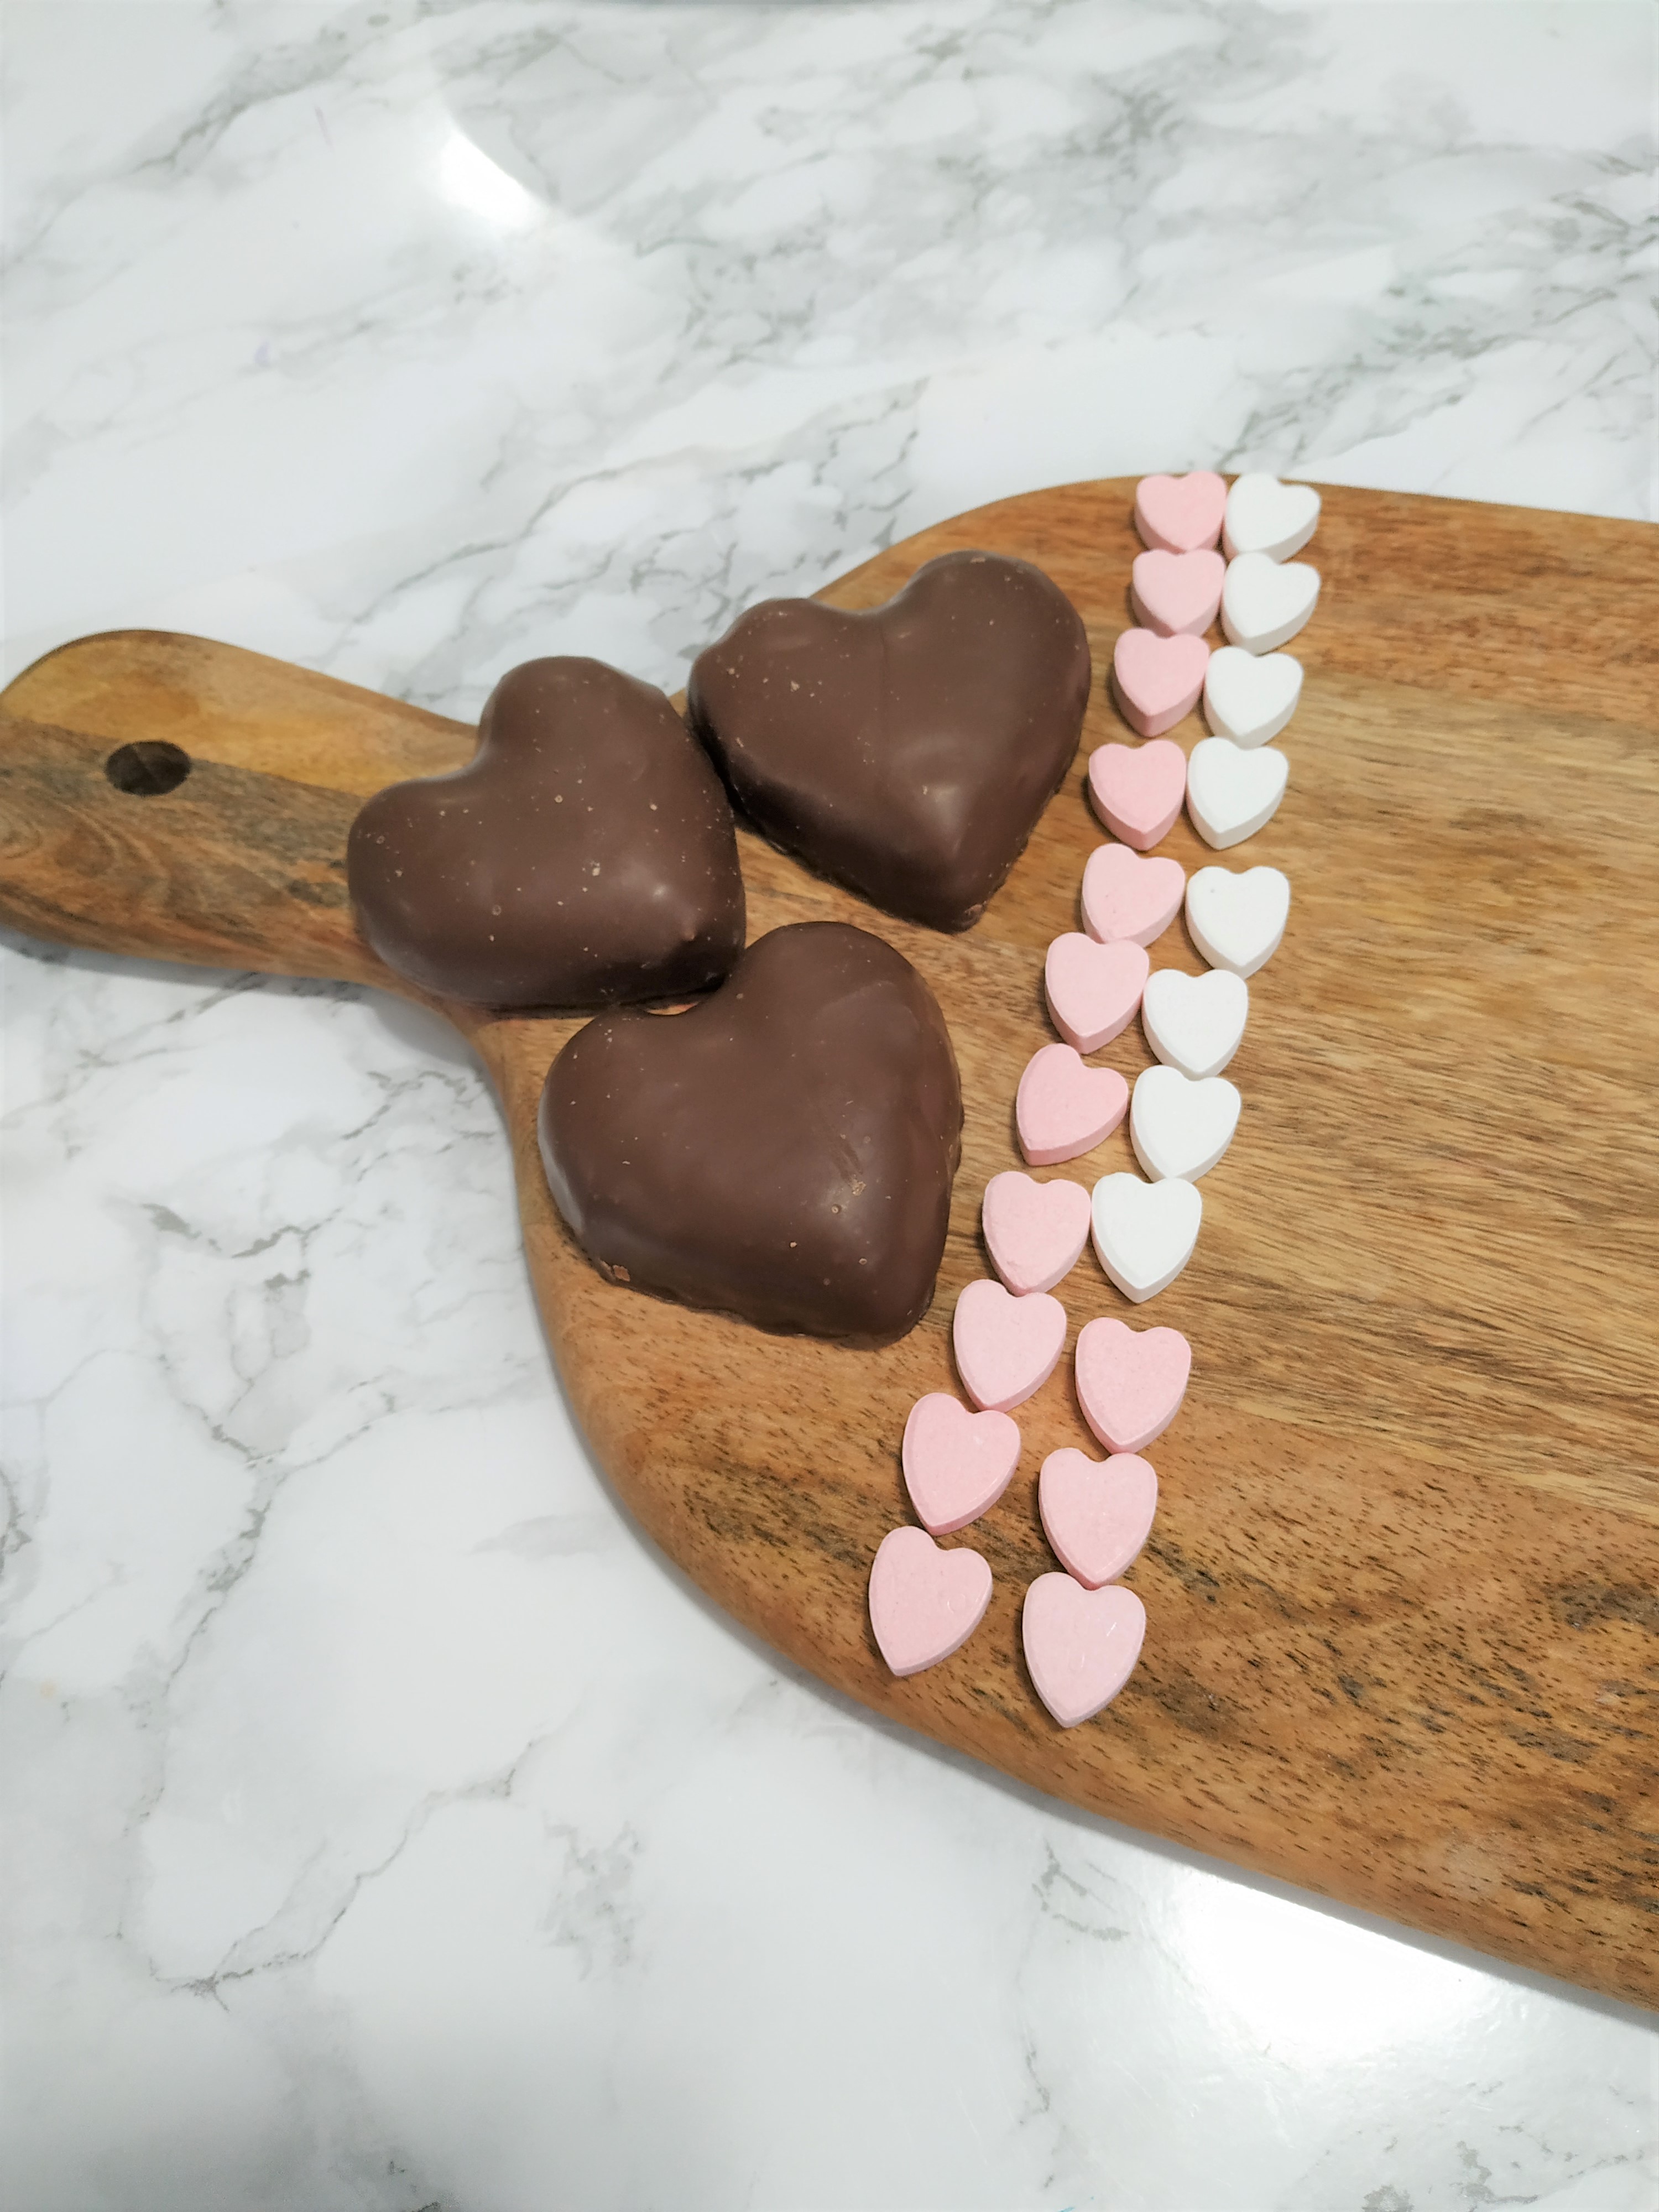 Putting pink and white hearts on the candy charcuterie board.